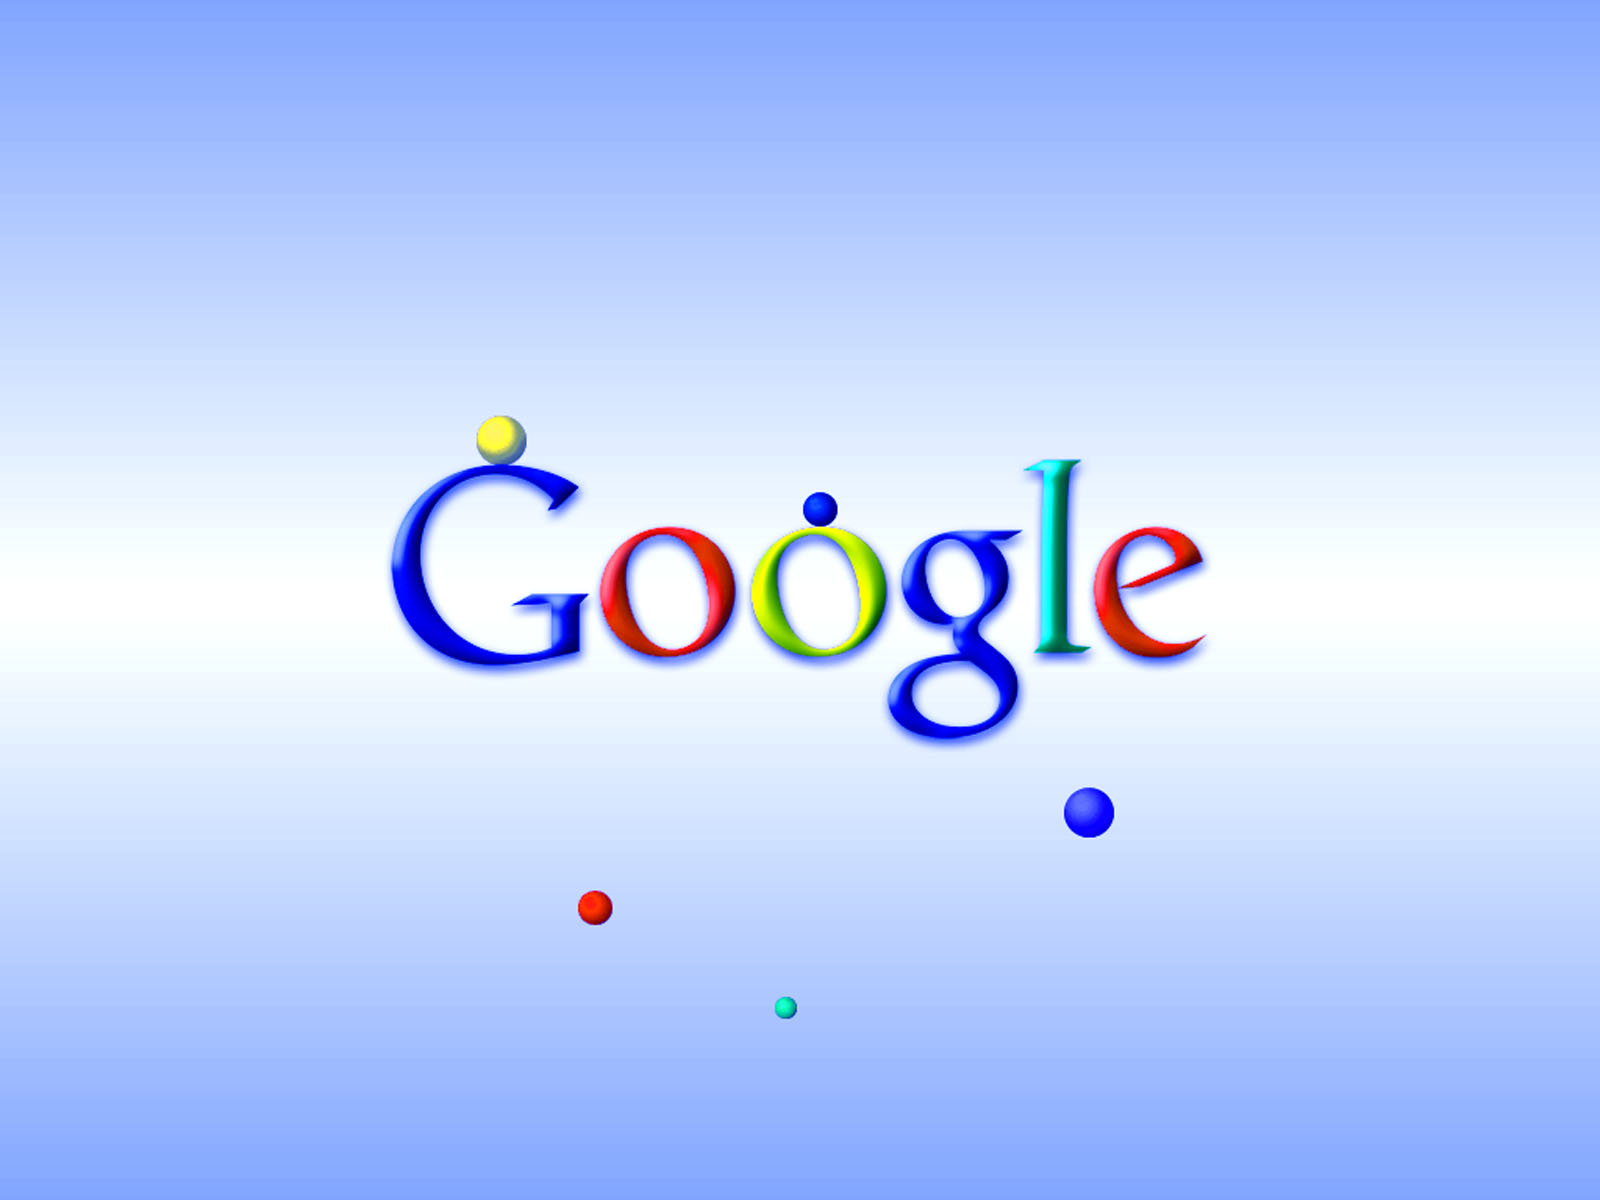 50 google images wallpapers free on